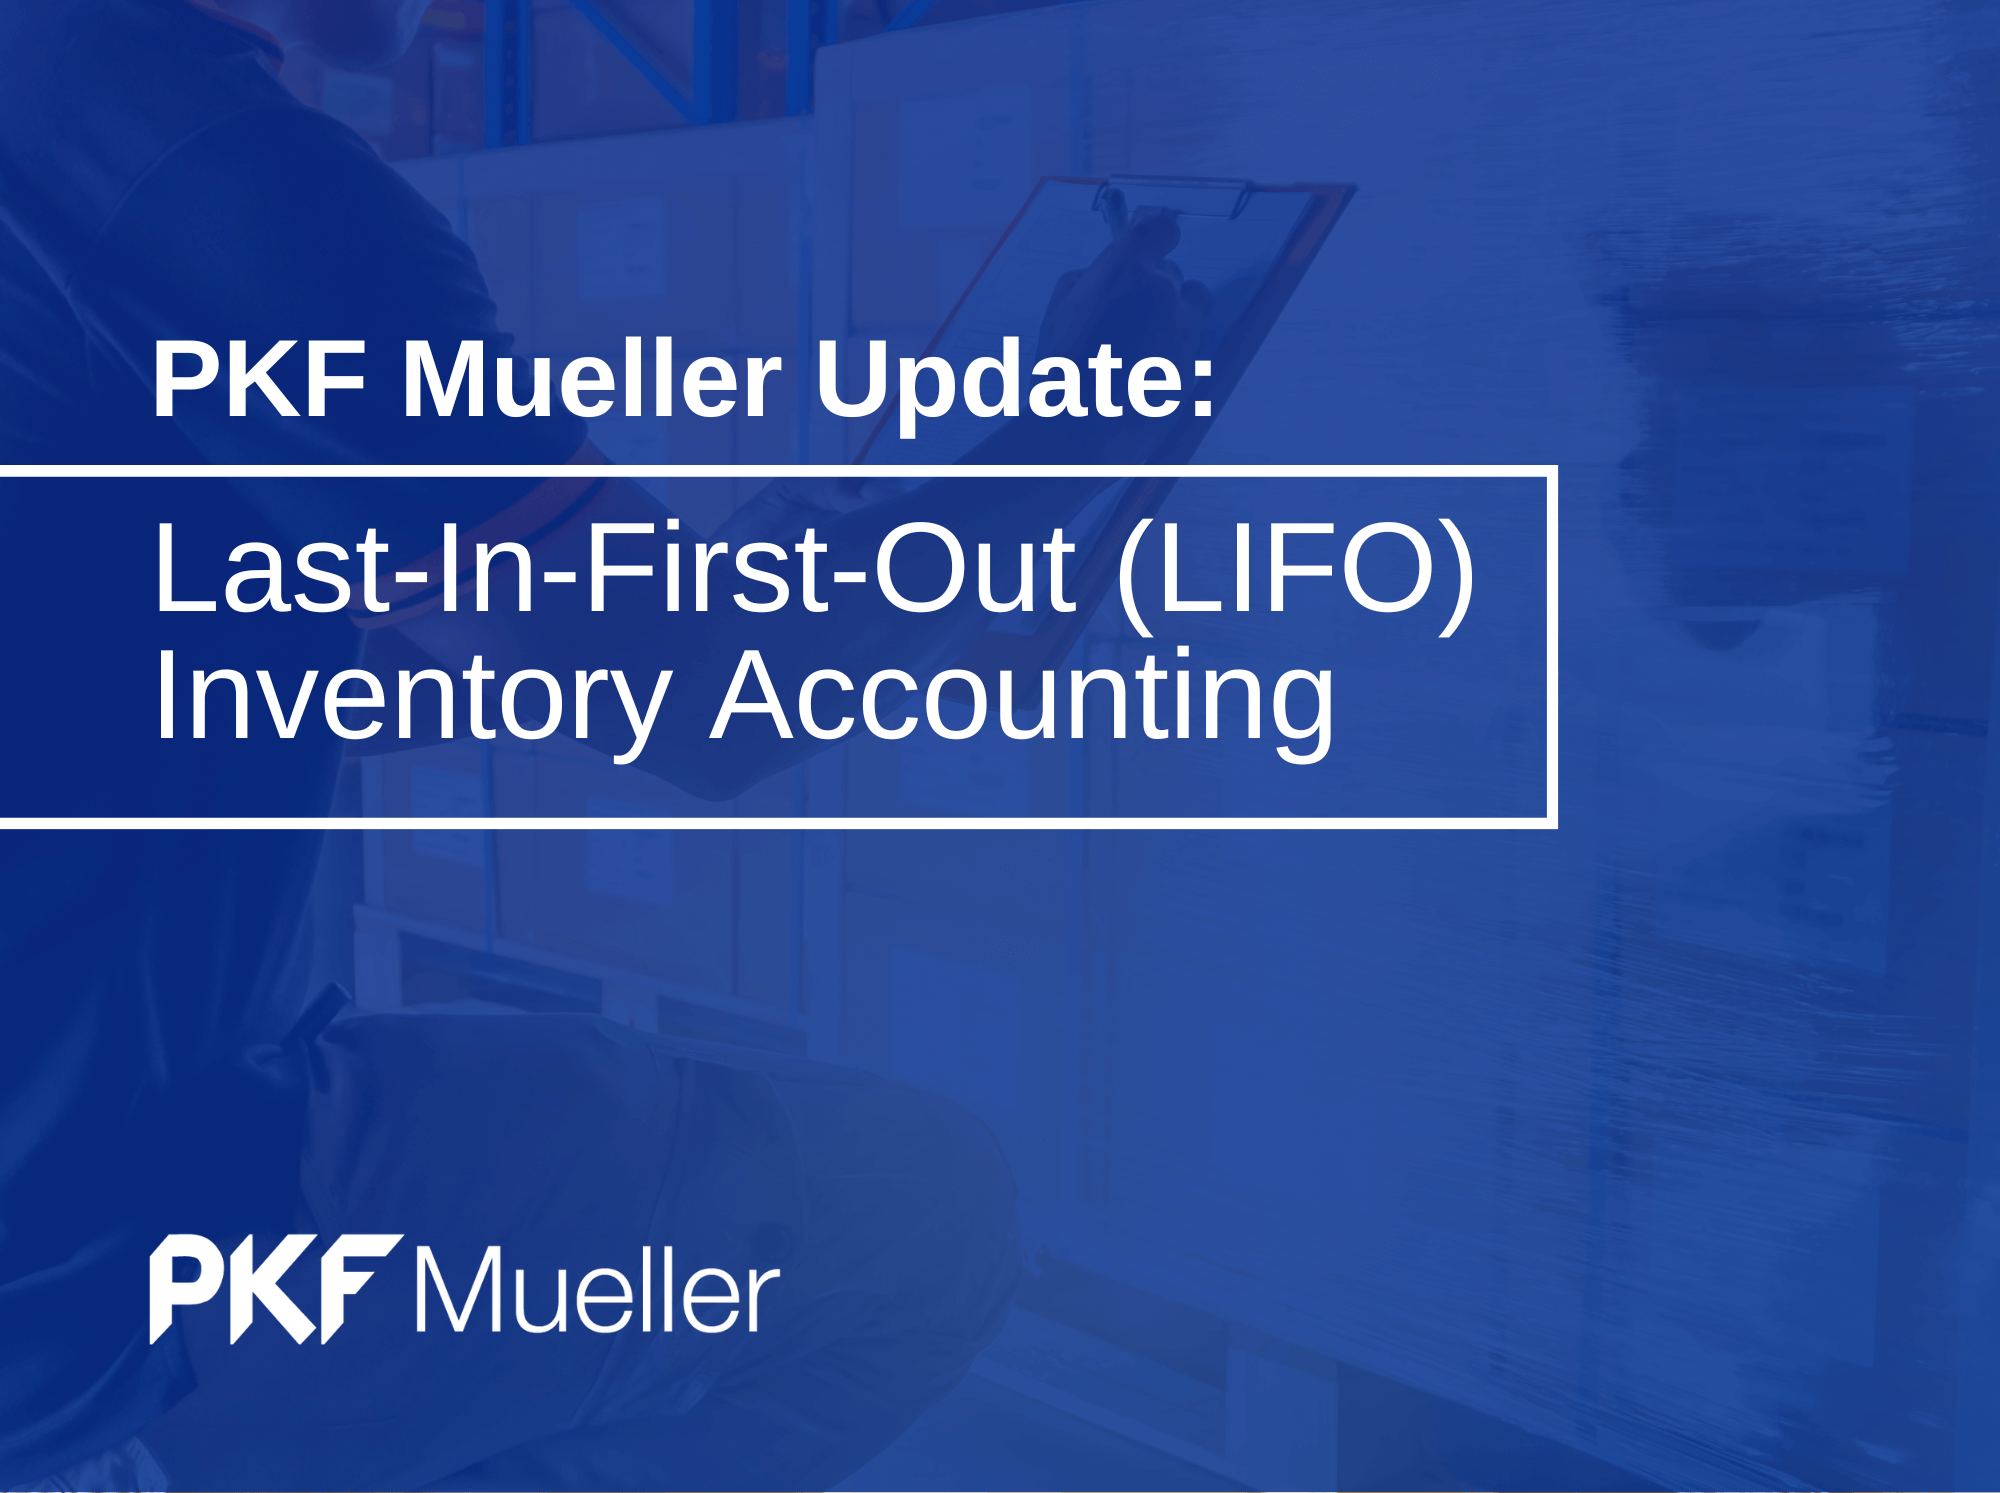 Last-In-First-Out (LIFO) Inventory Accounting